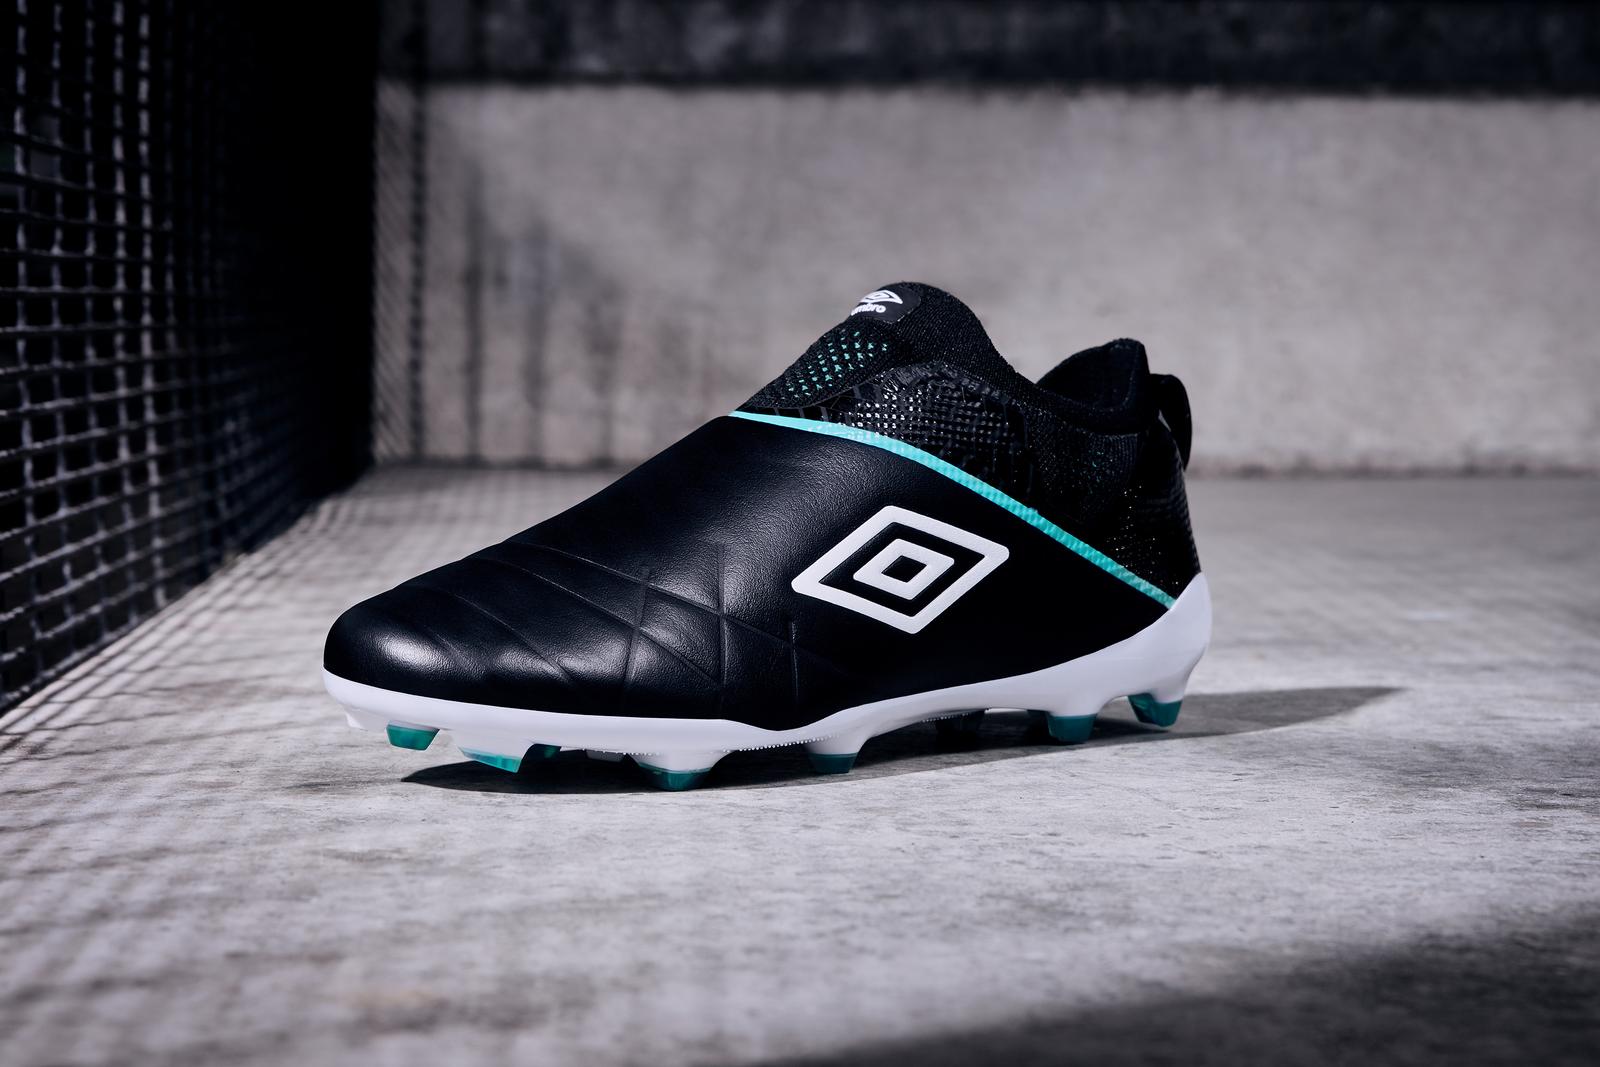 The First Ever Umbro Laceless Boots 